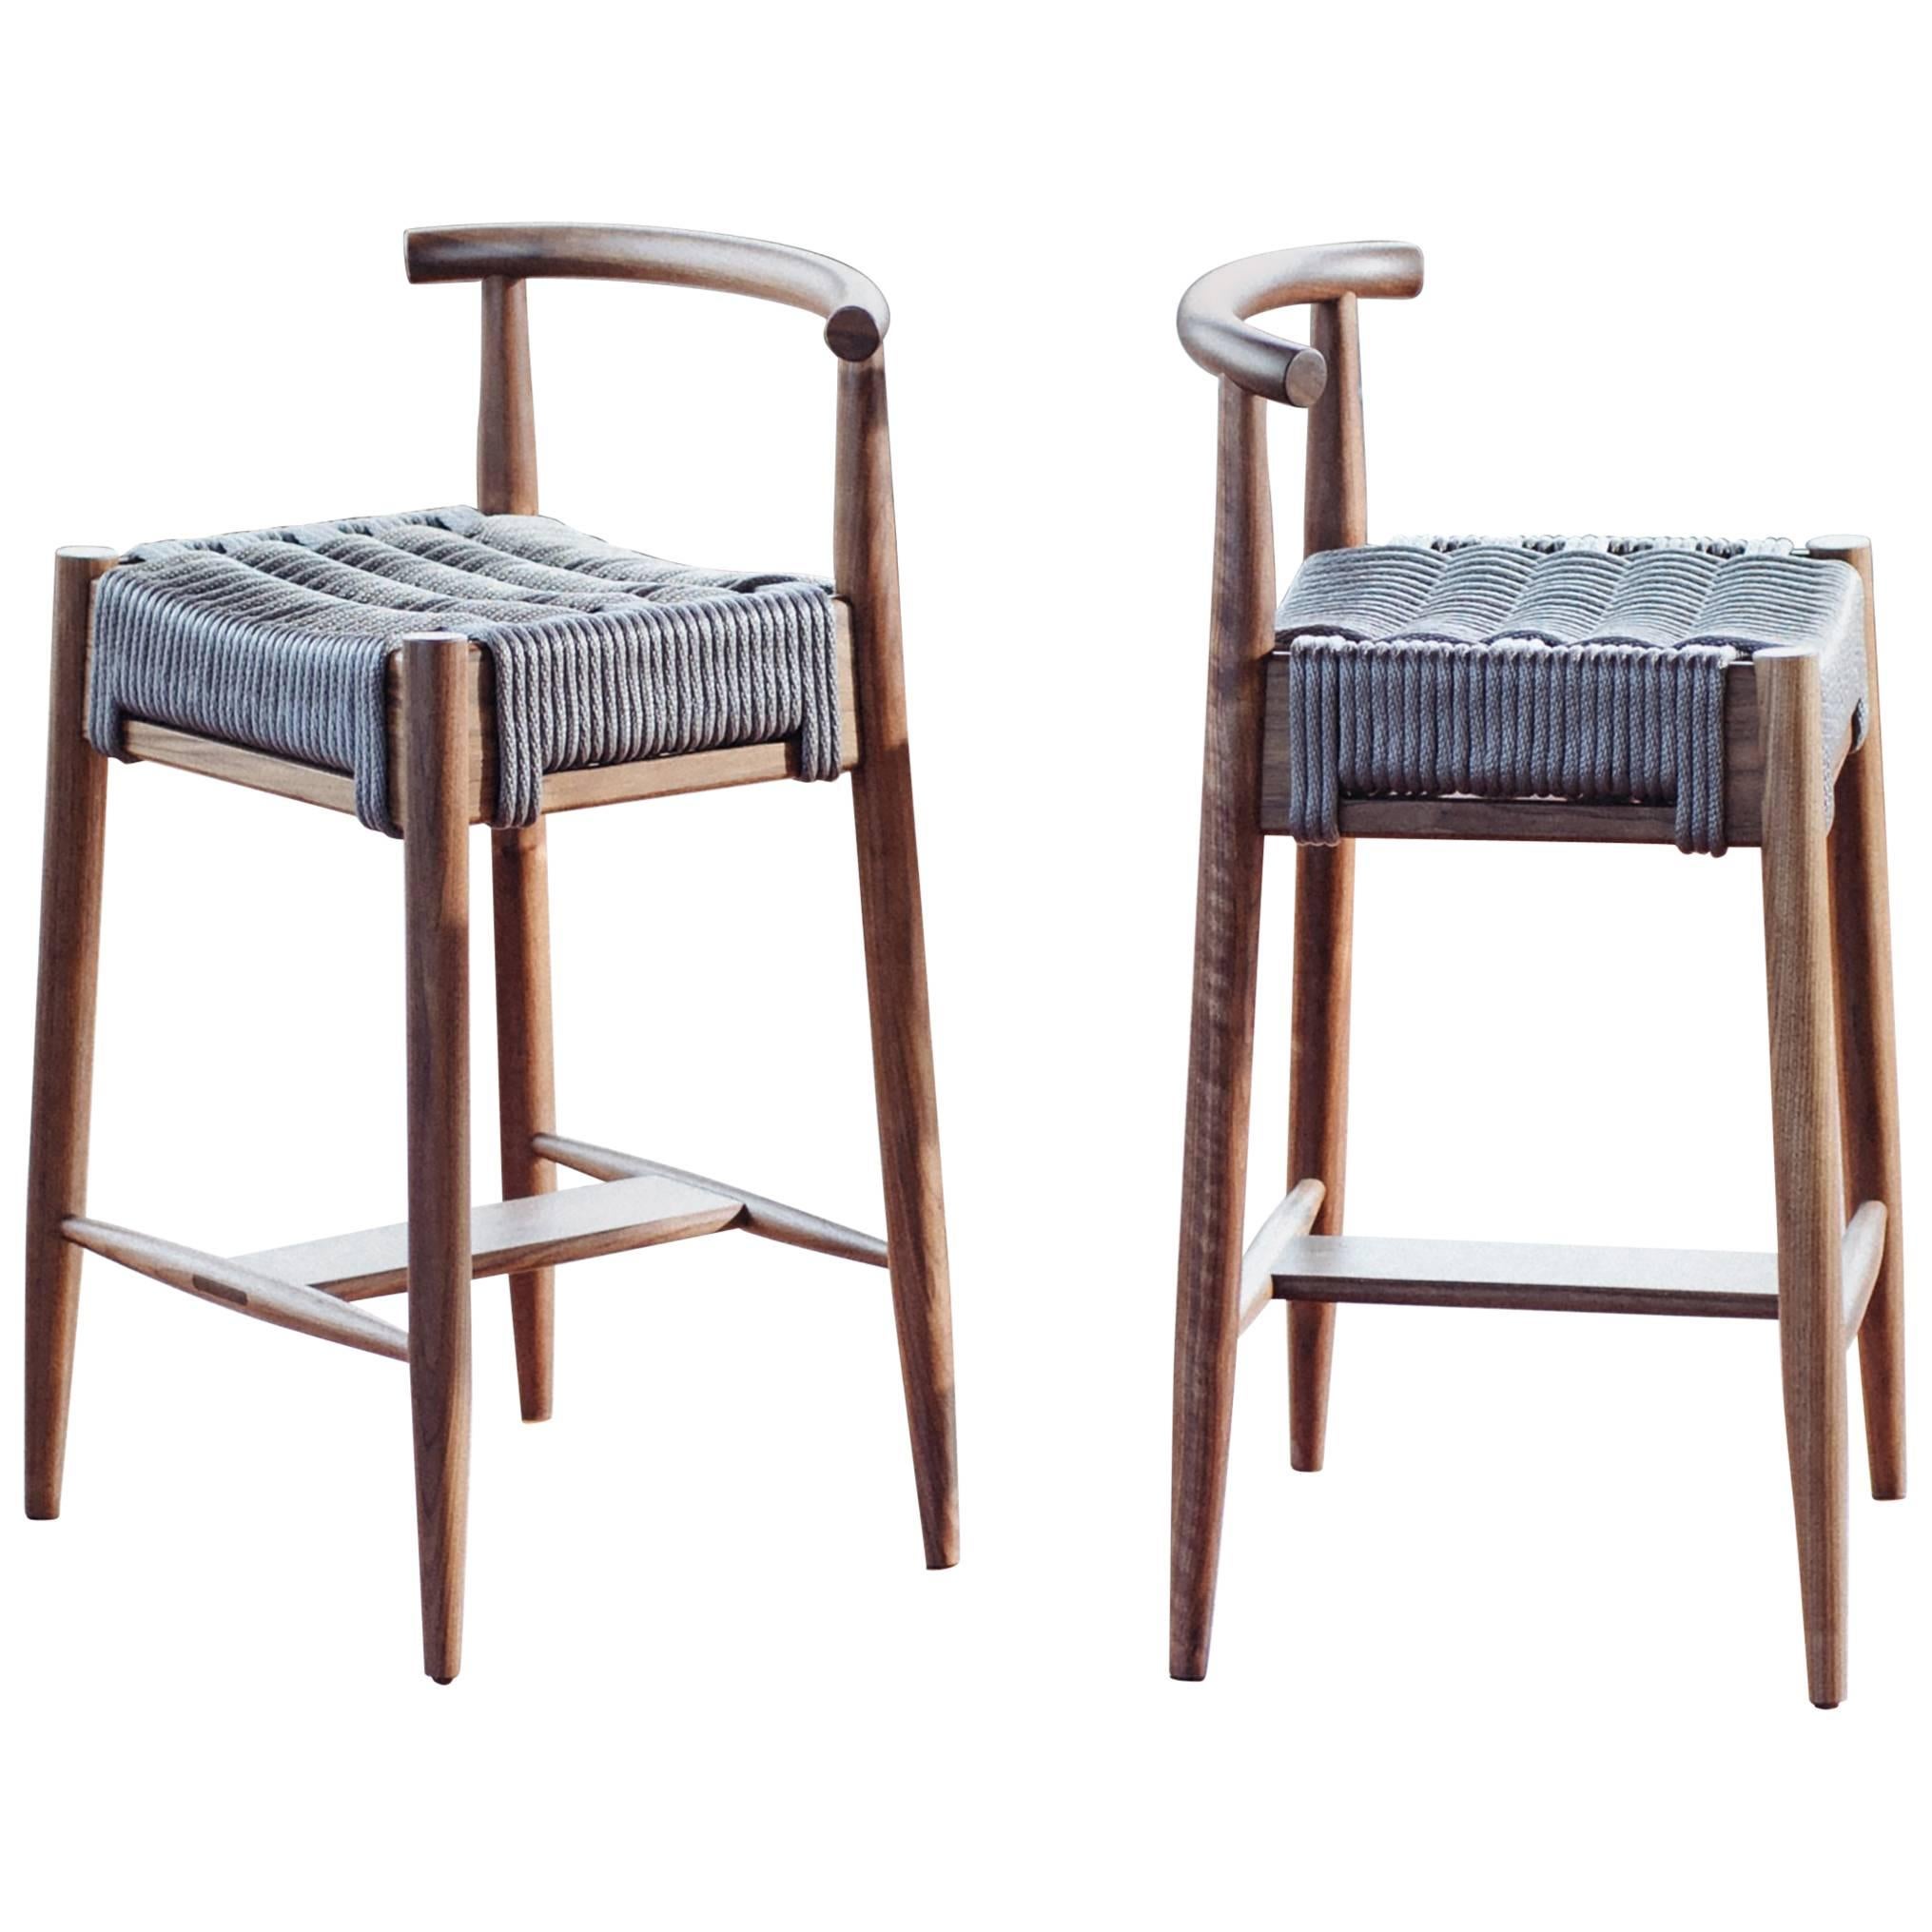 Harbor Stool, Handmade Modern Walnut and Rope Seat Counter Stool with Backrest